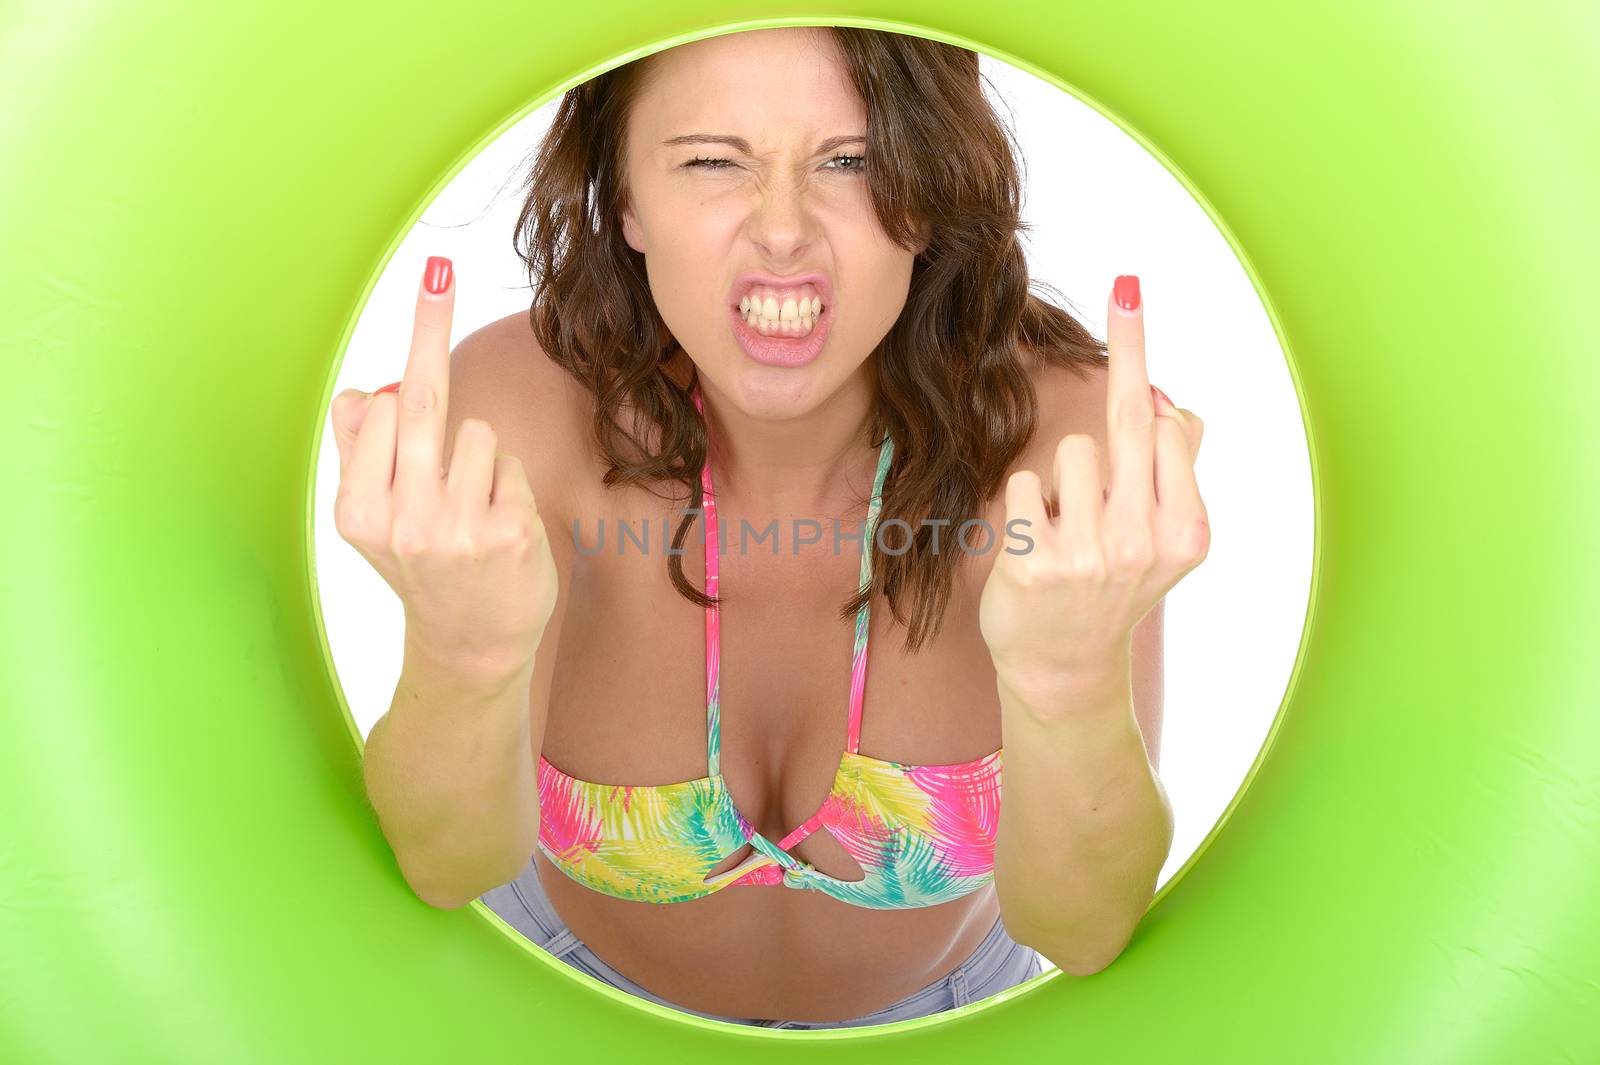 Attractive Young Woman Looking Through a Green Rubber Ring Giving Middle Finger on Both Hands